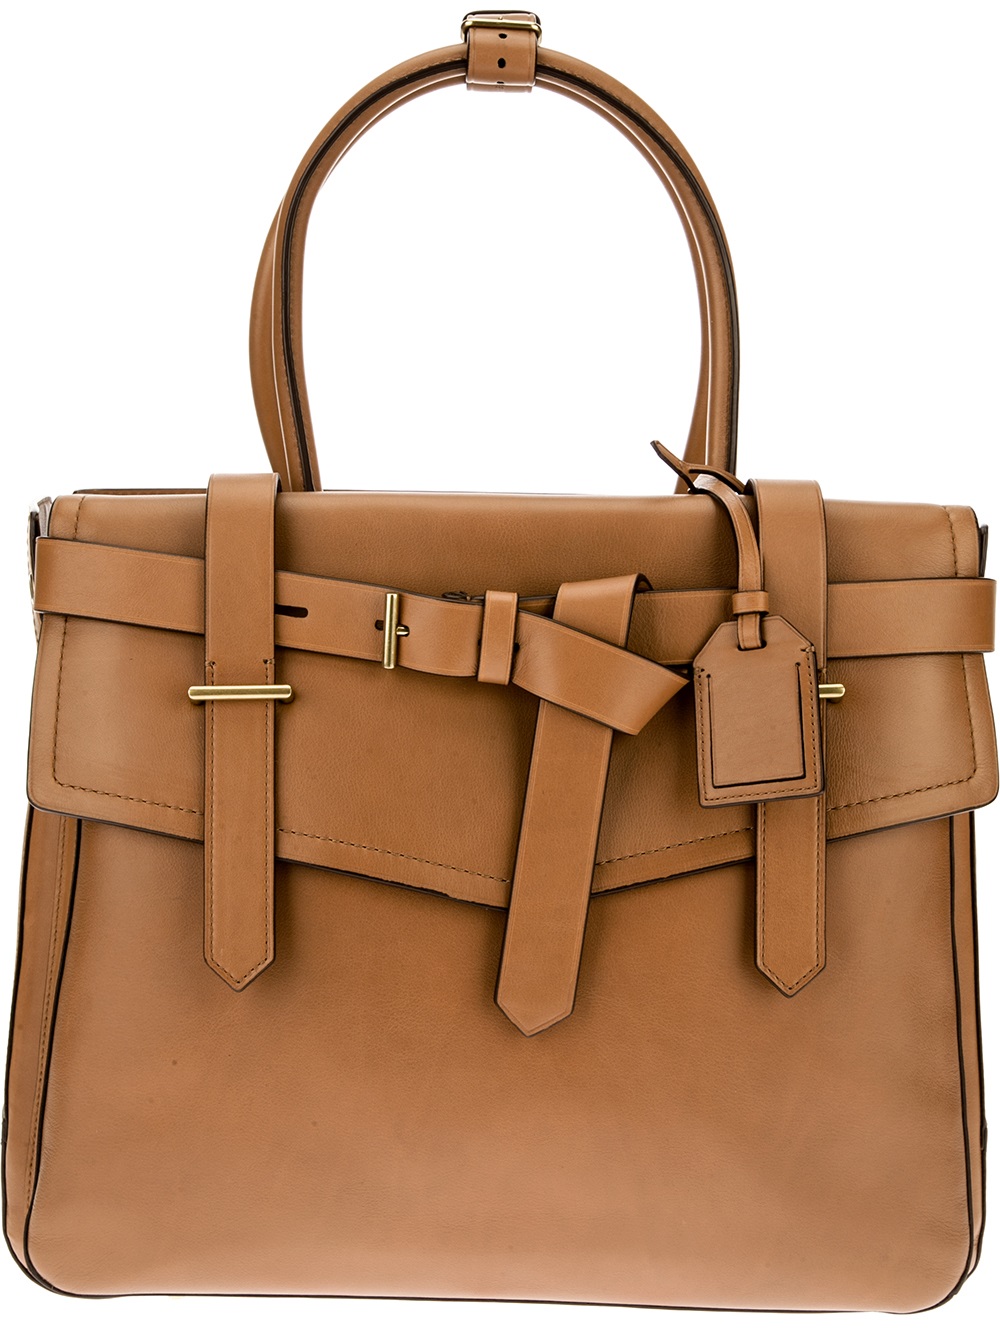 Reed Krakoff asks the age-old question: Does size matter? - PurseBlog